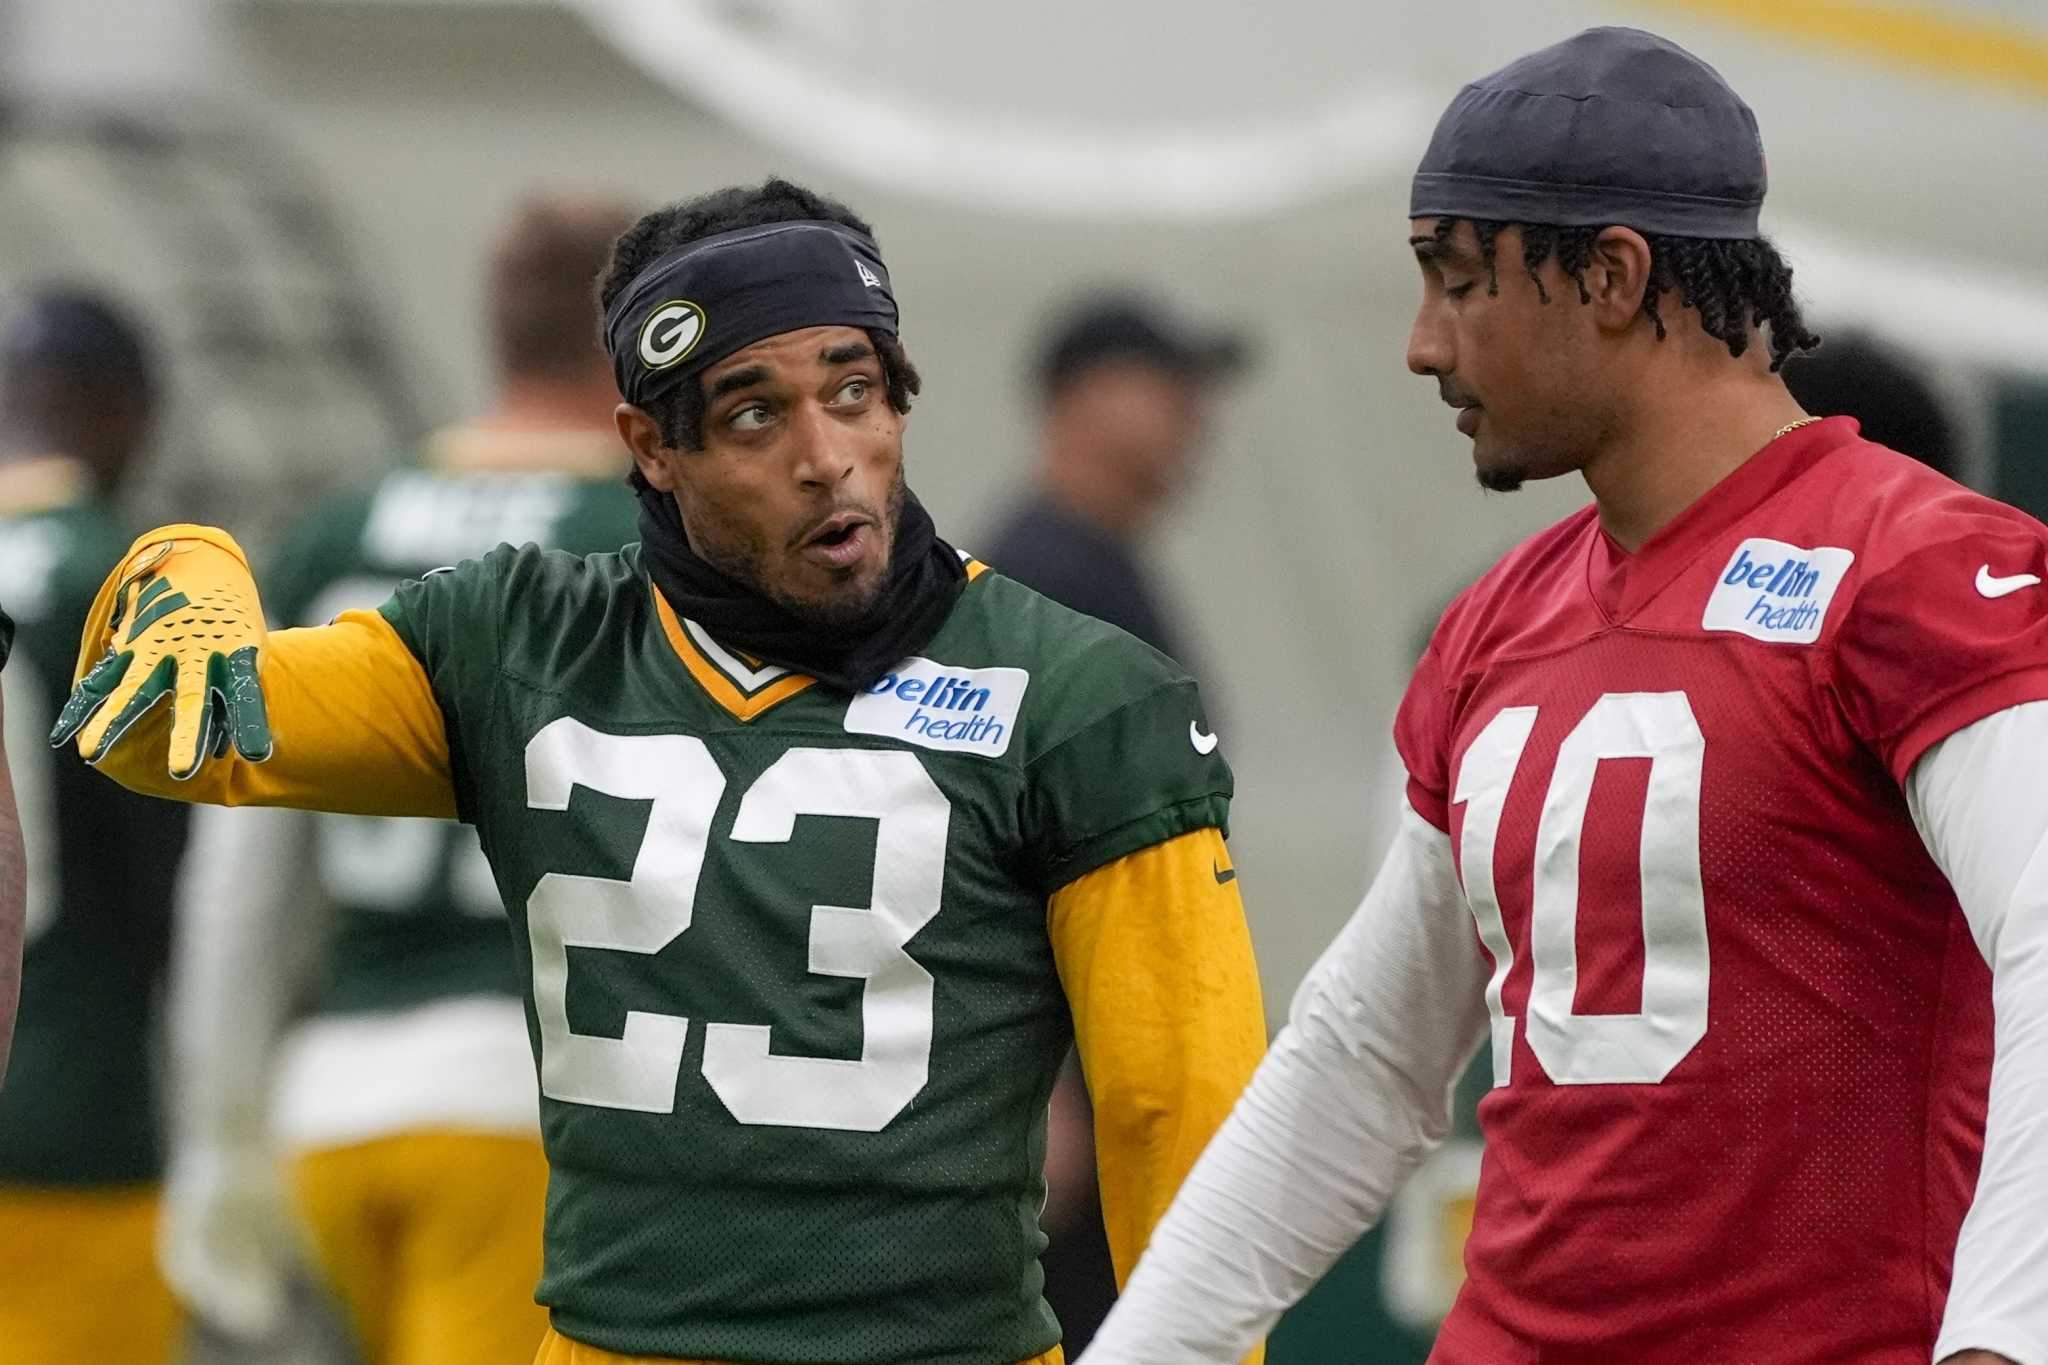 Jaire Alexander says he's focusing on team goals while praising Packers' recent staff changes